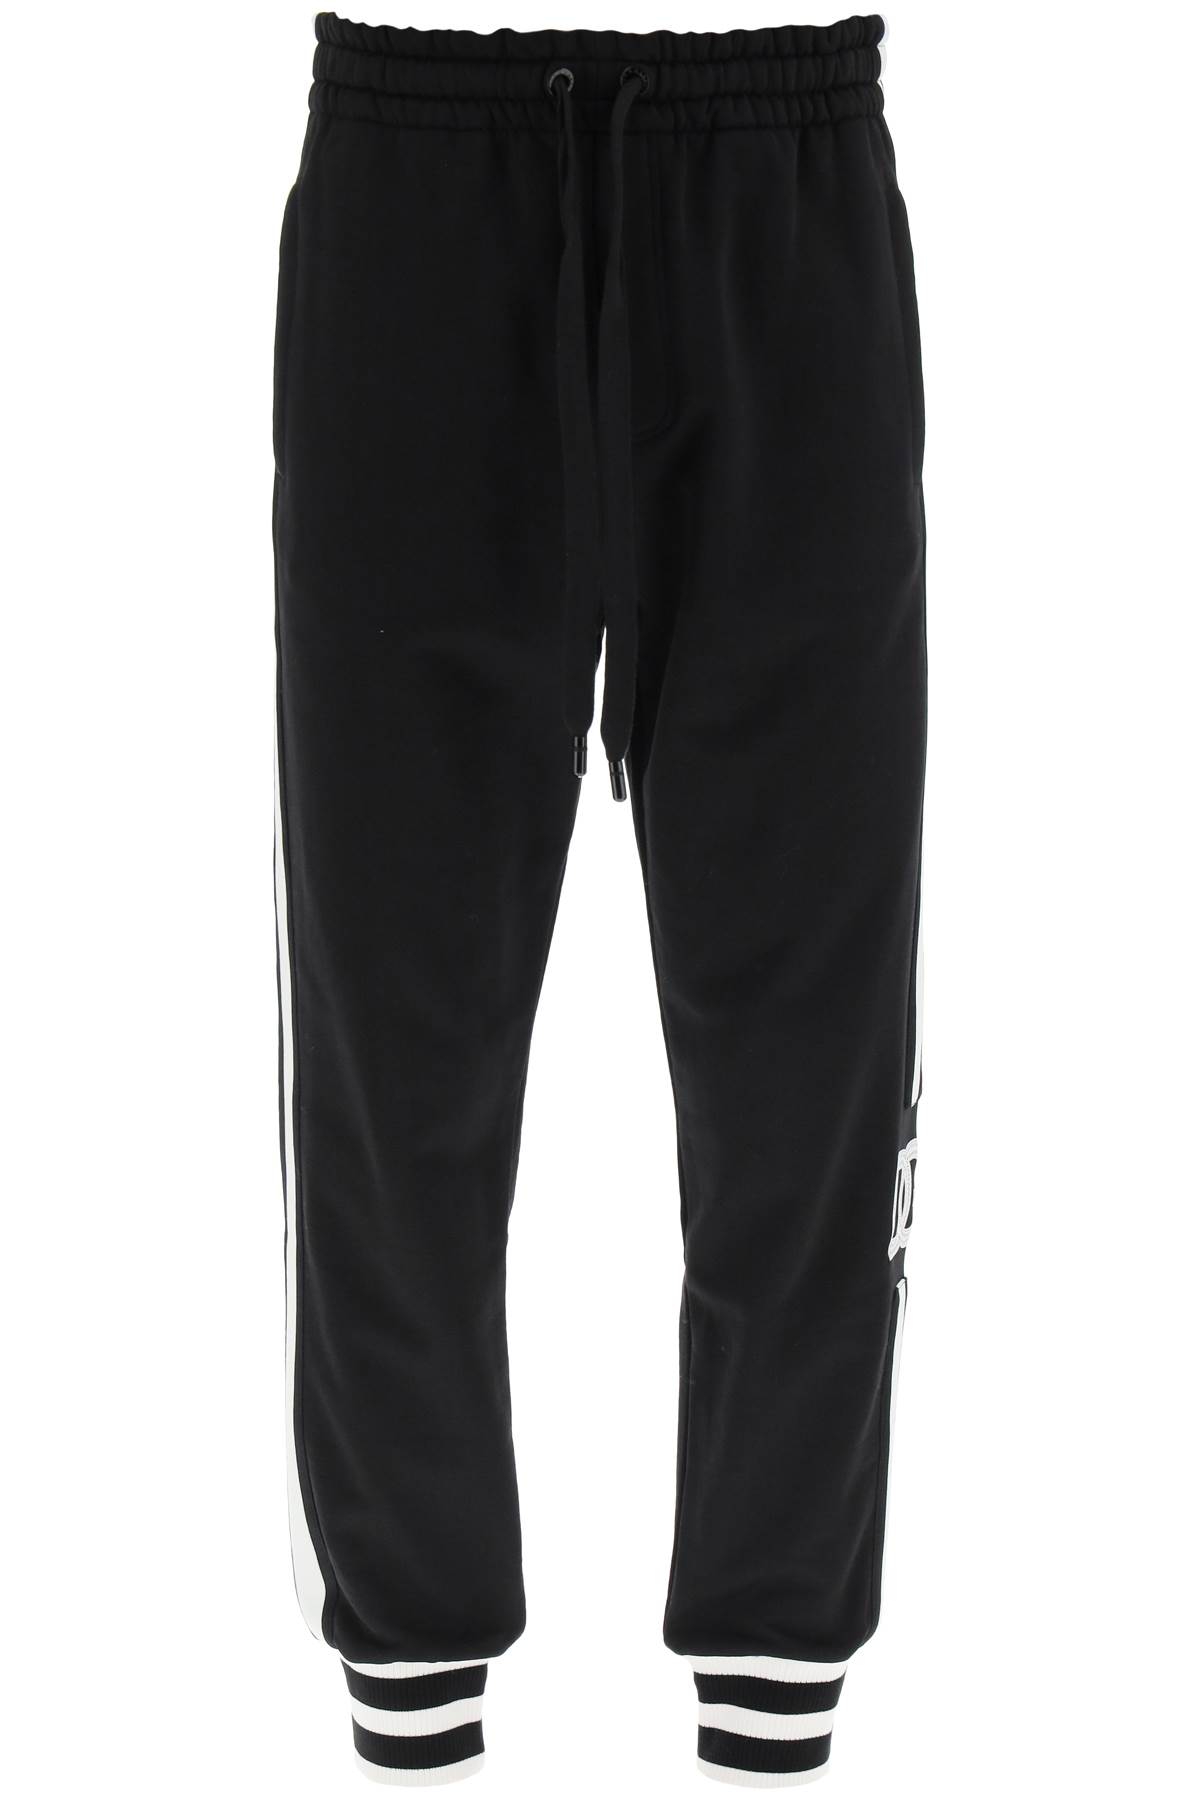 DOLCE & GABBANA COTTON SWEATPANTS WITH BANDS